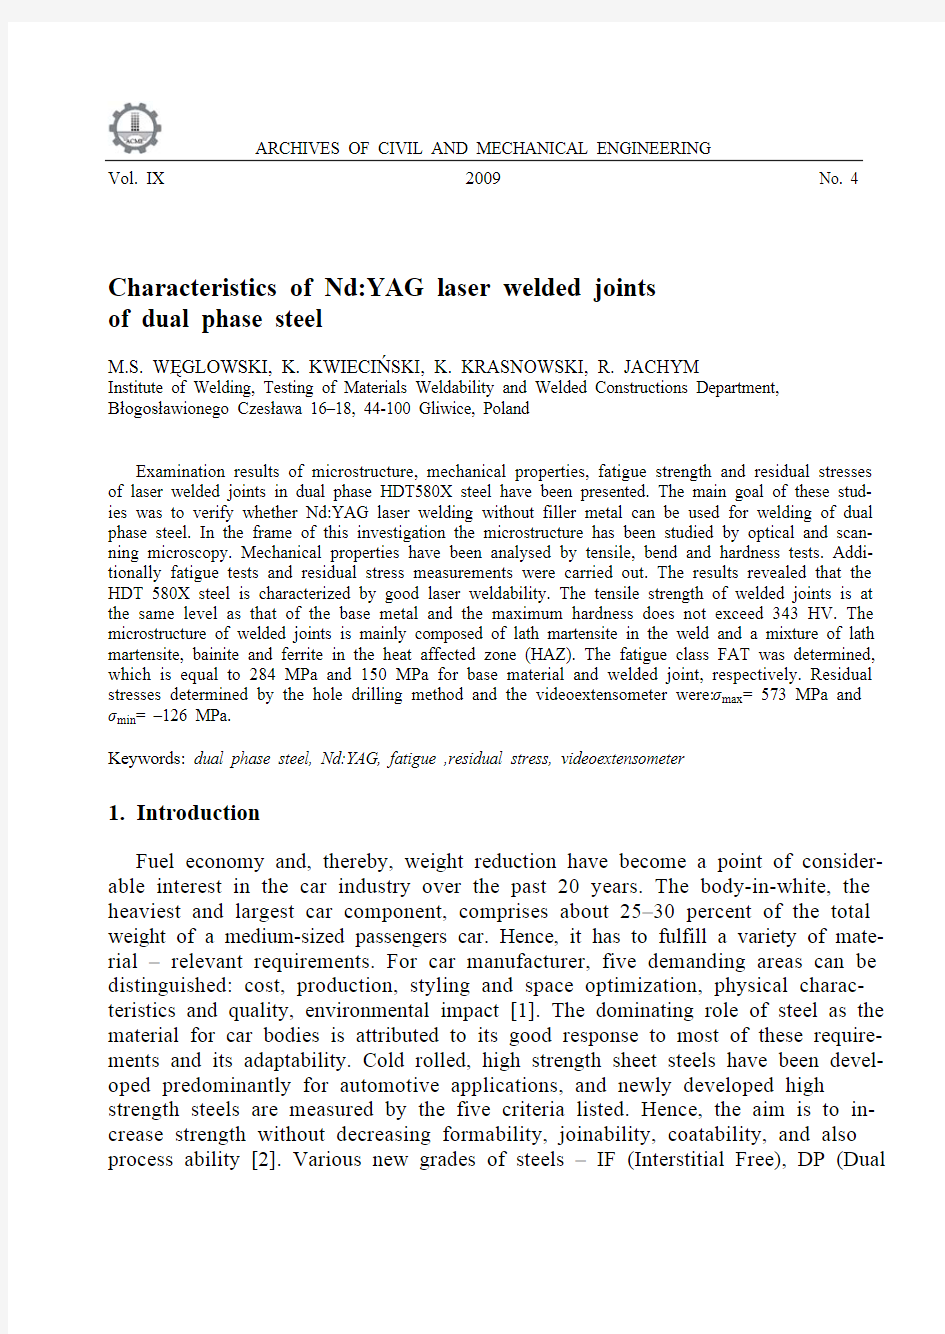 Characteristics of Nd_YAG Laser Welded Joints of Dual Phase Steel